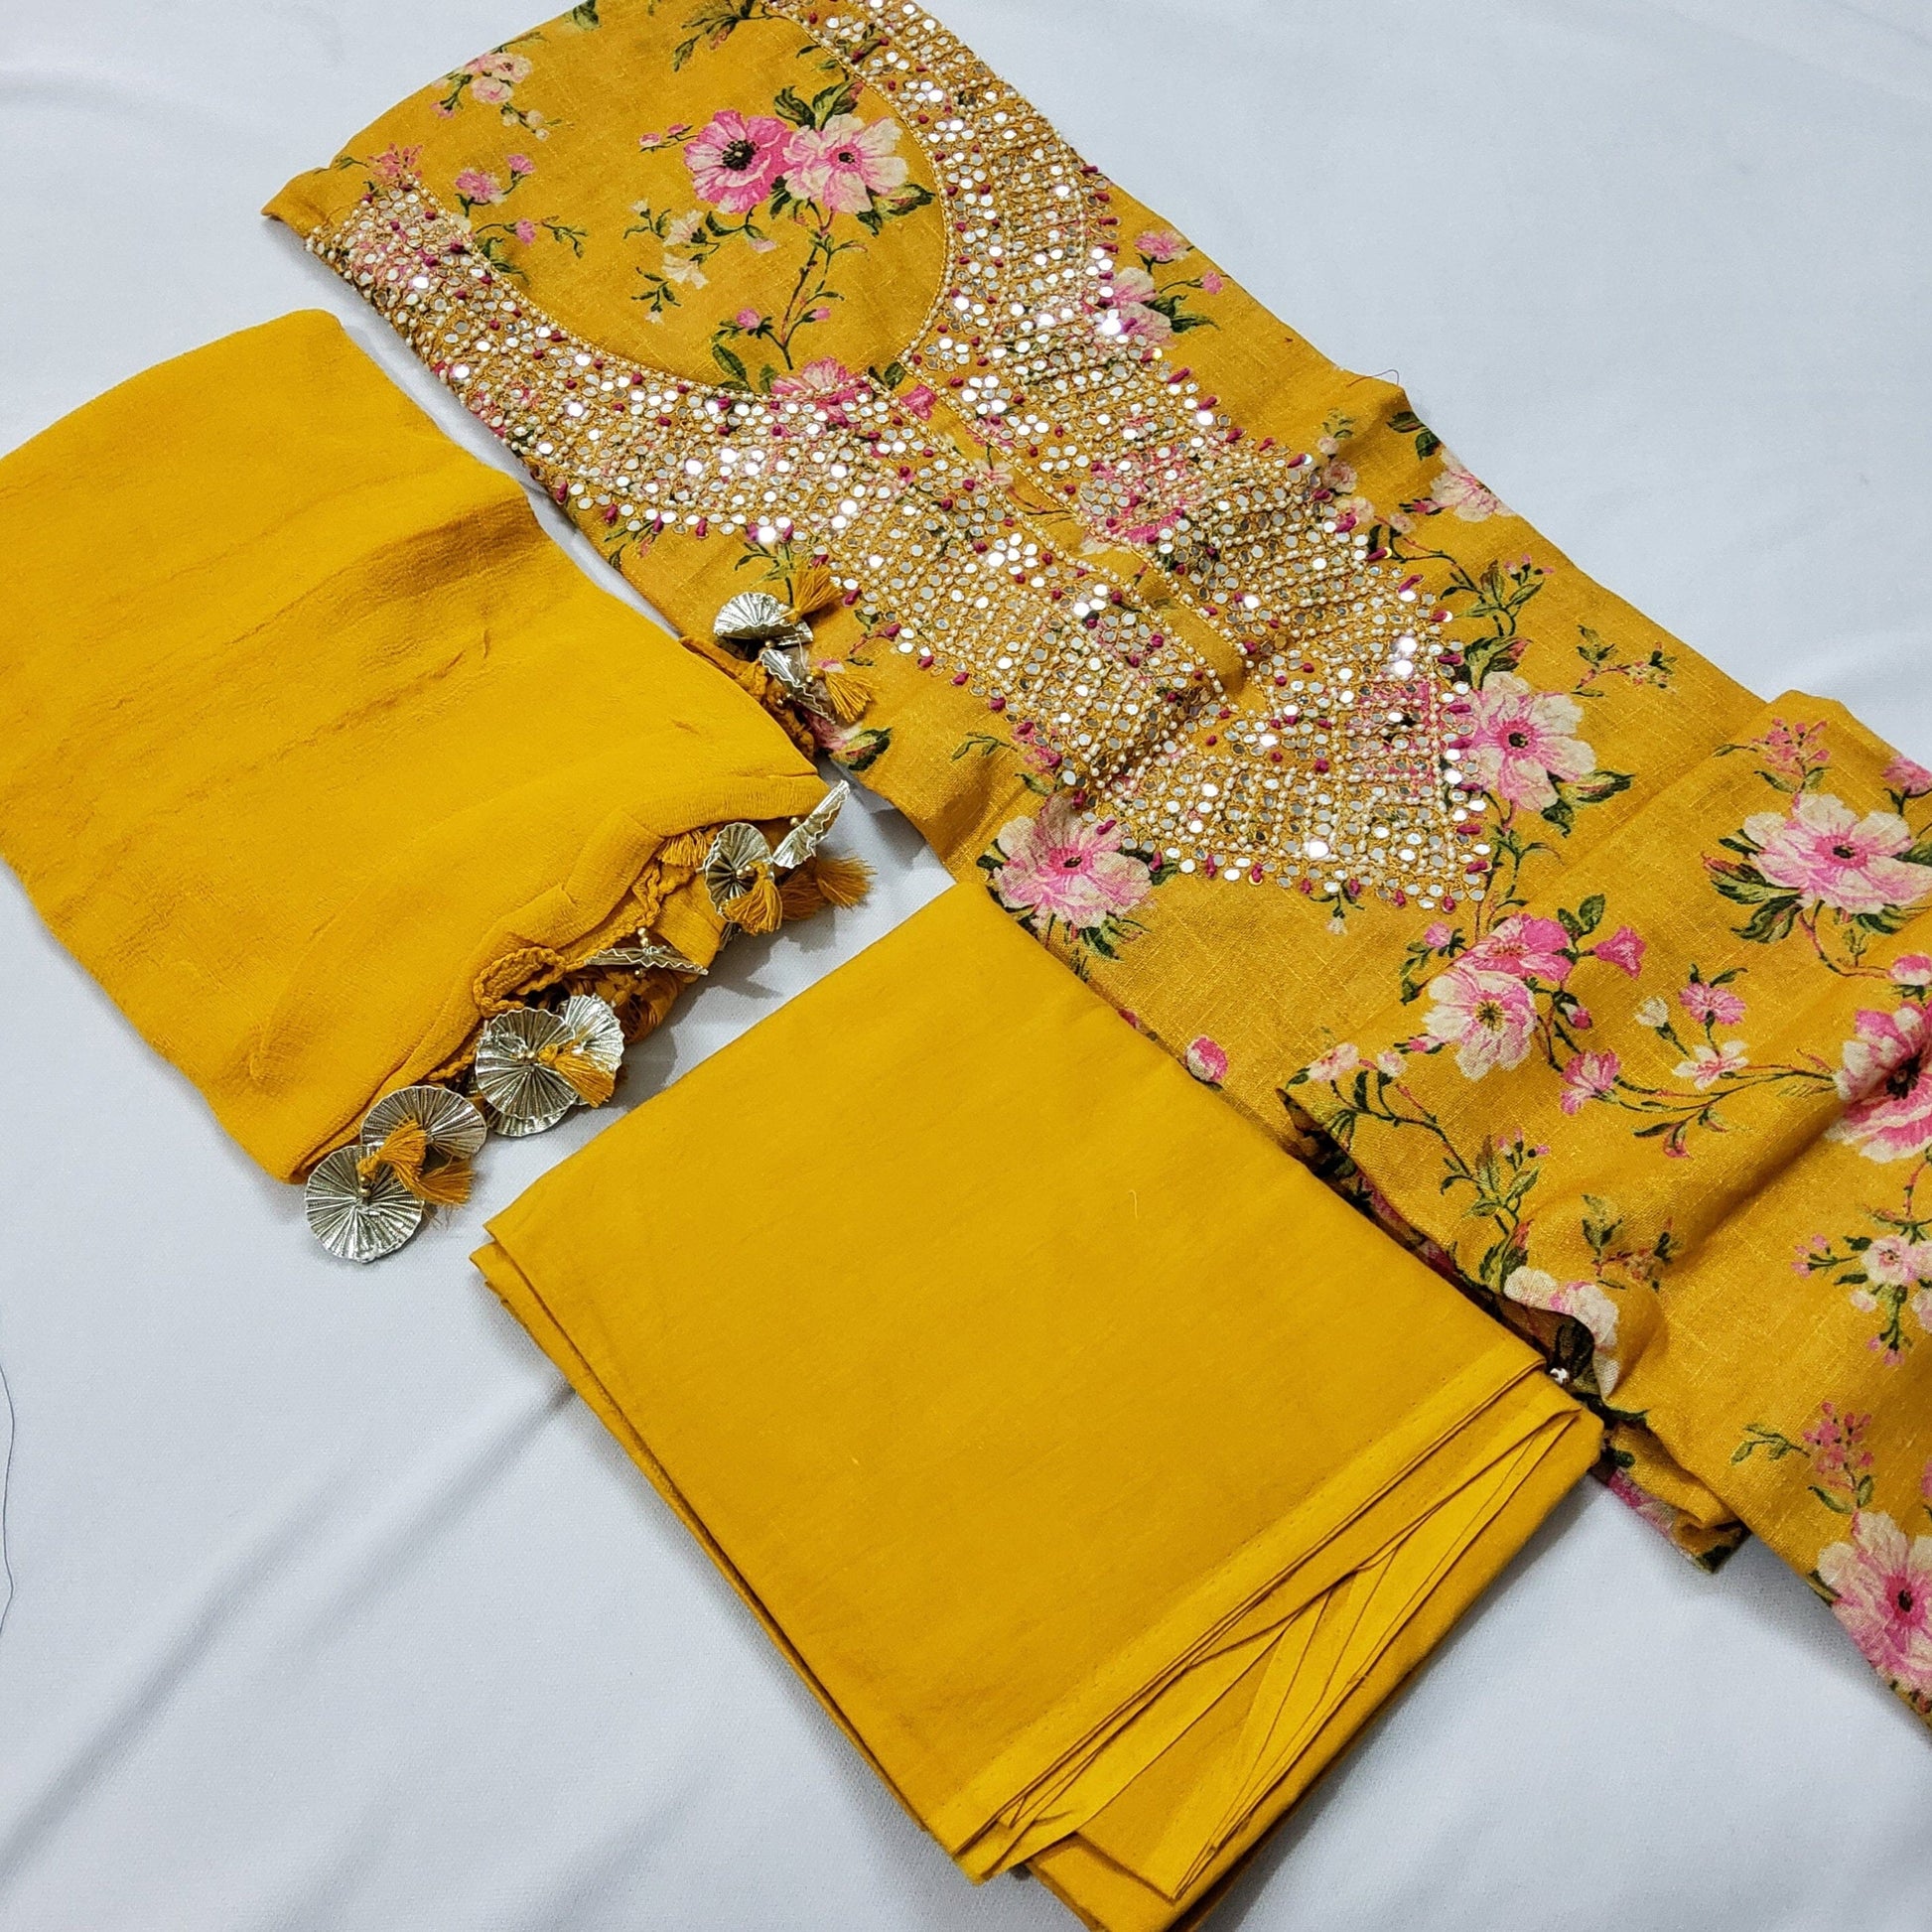 Linen Cotton Floral Print Dress Material with handwork